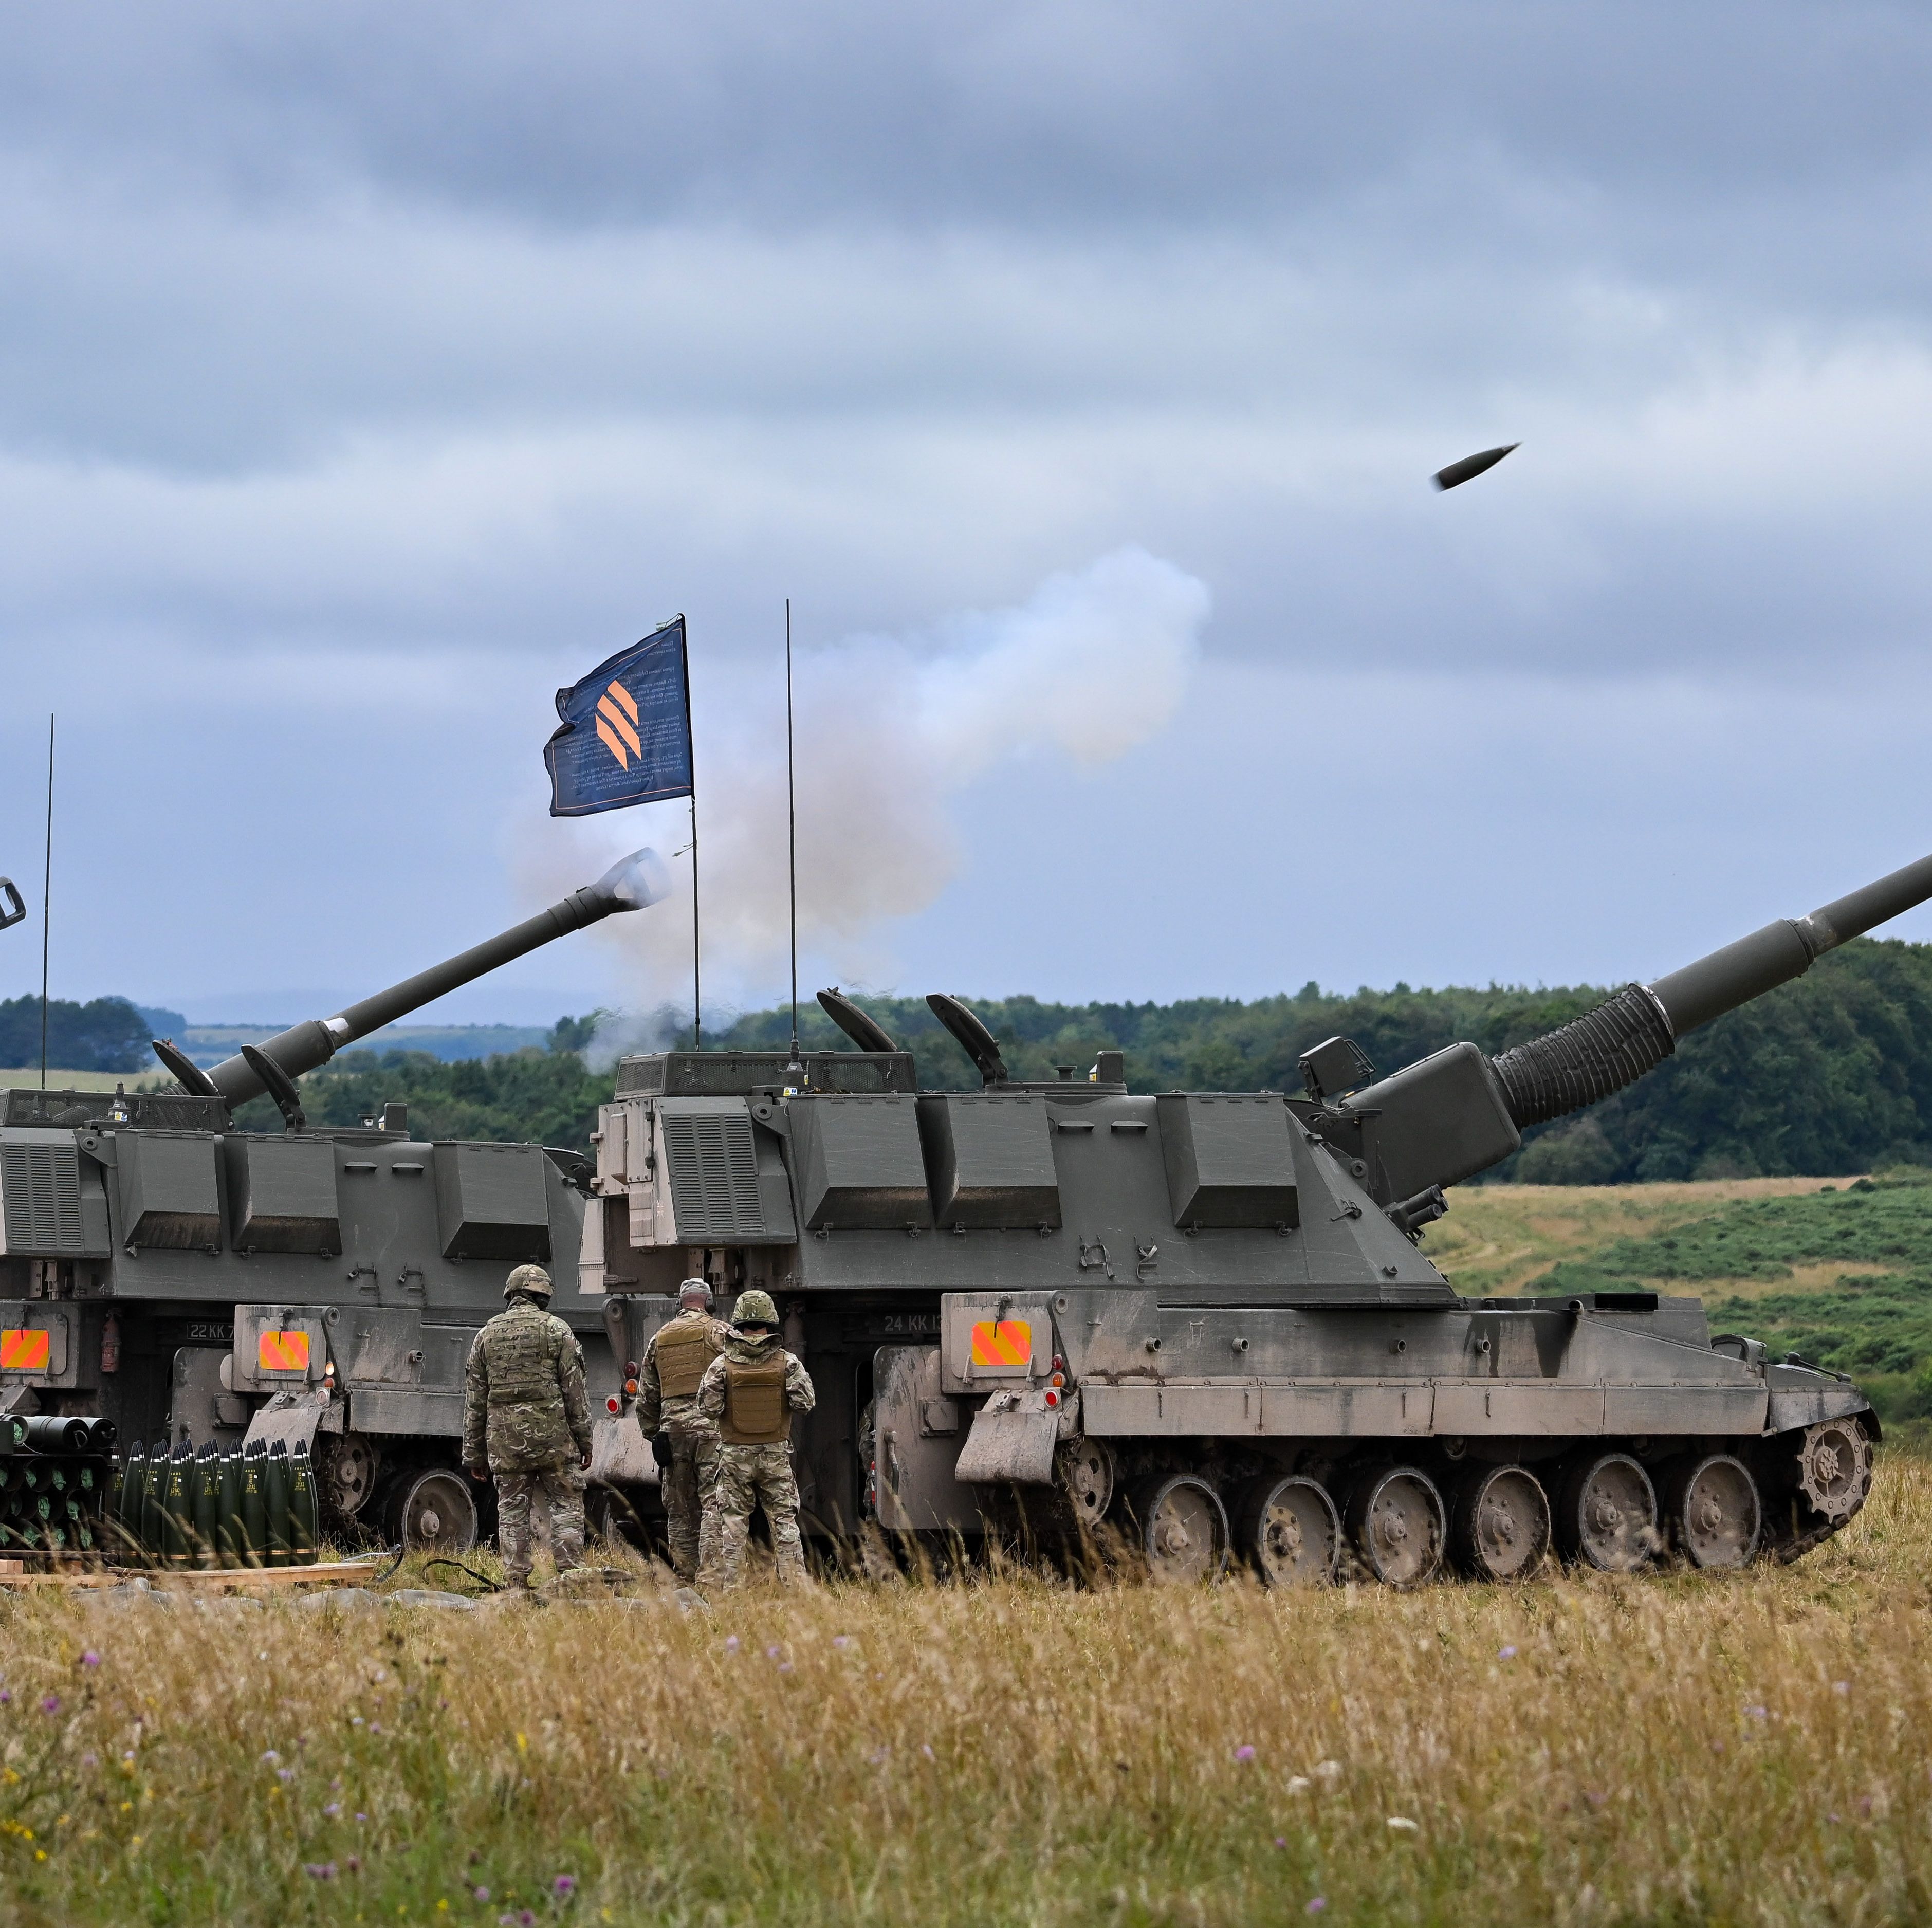 Ukraine's New AS-90 Howitzers Are So Powerful, They Can Blast Targets 20 Miles Away